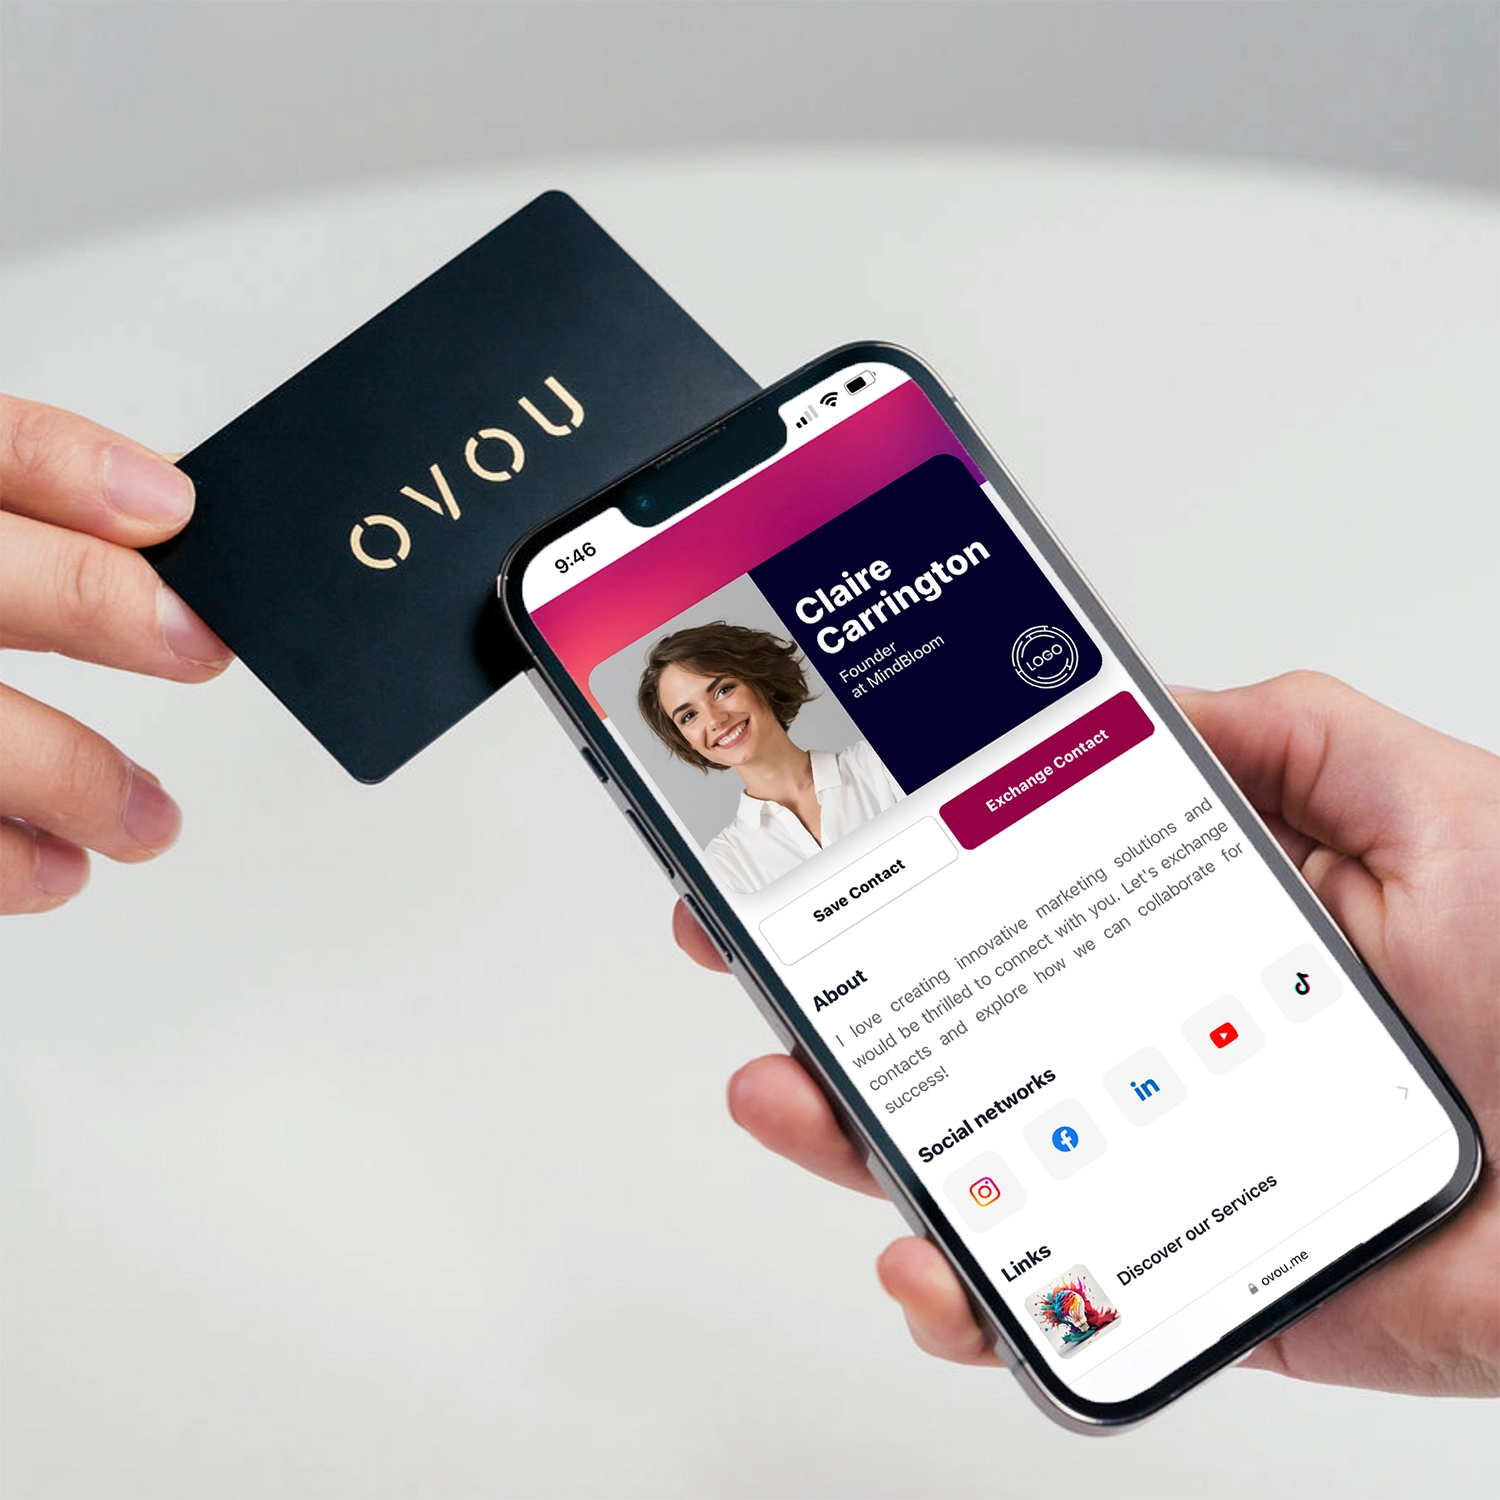 tapping OVOU digital business card to smartphone. Showing person's digital business profile with her content on the phone.